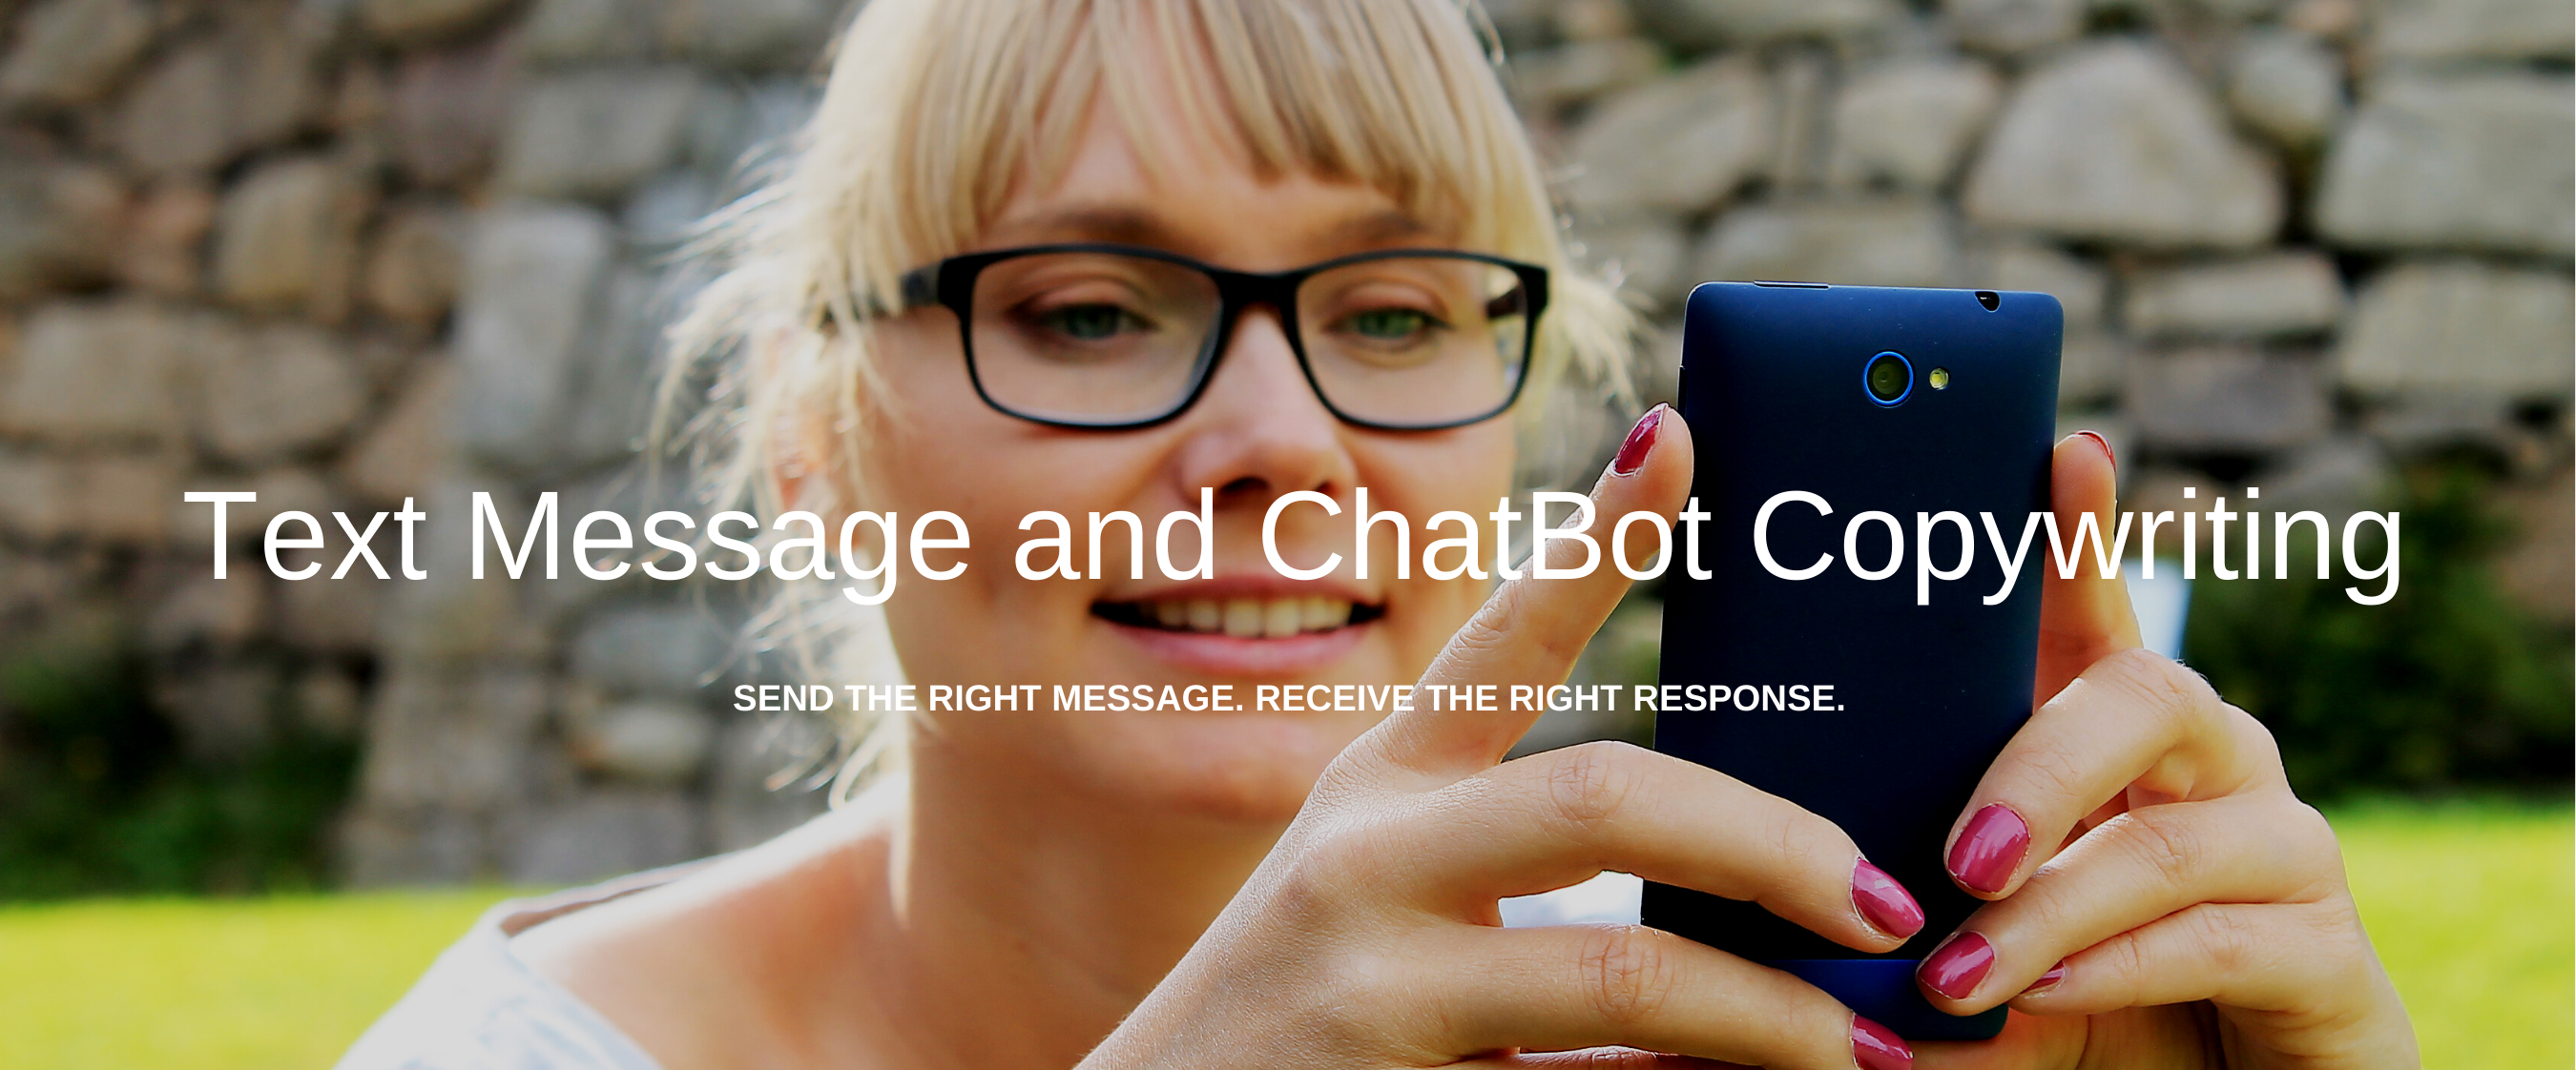 Text Message and Chat Bot Copywriting